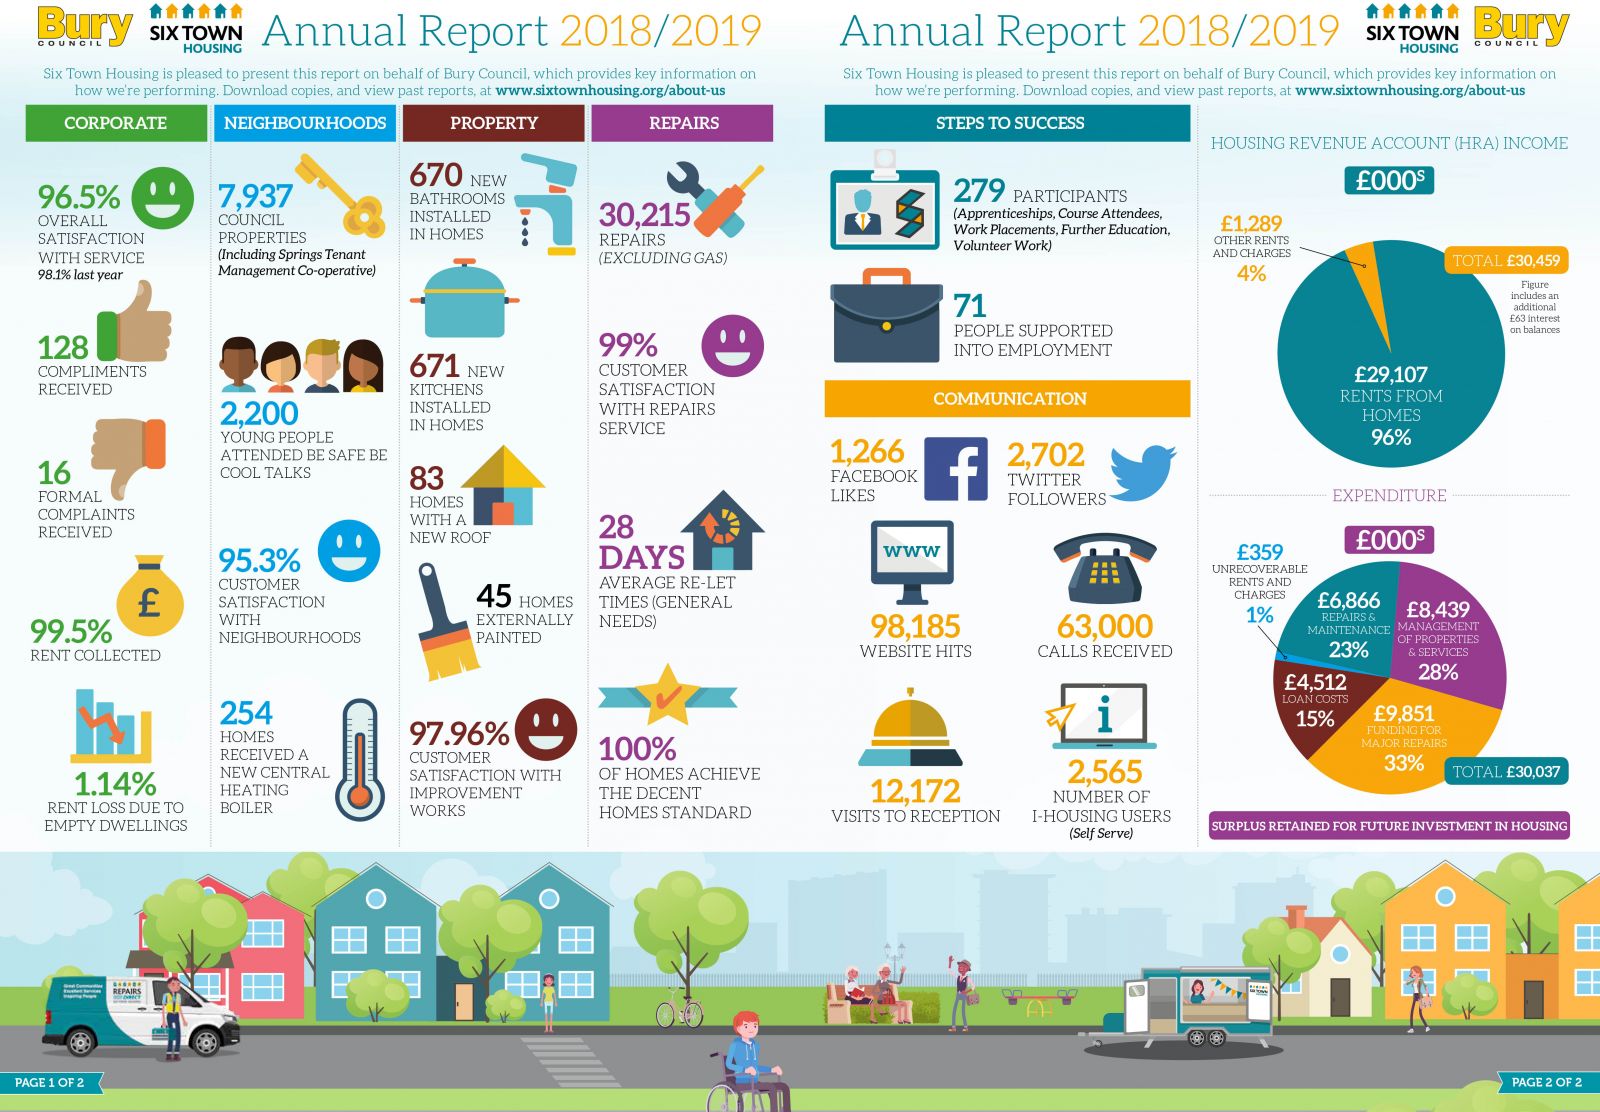 Click to download the Annual Report as a PDF (1.6MB)